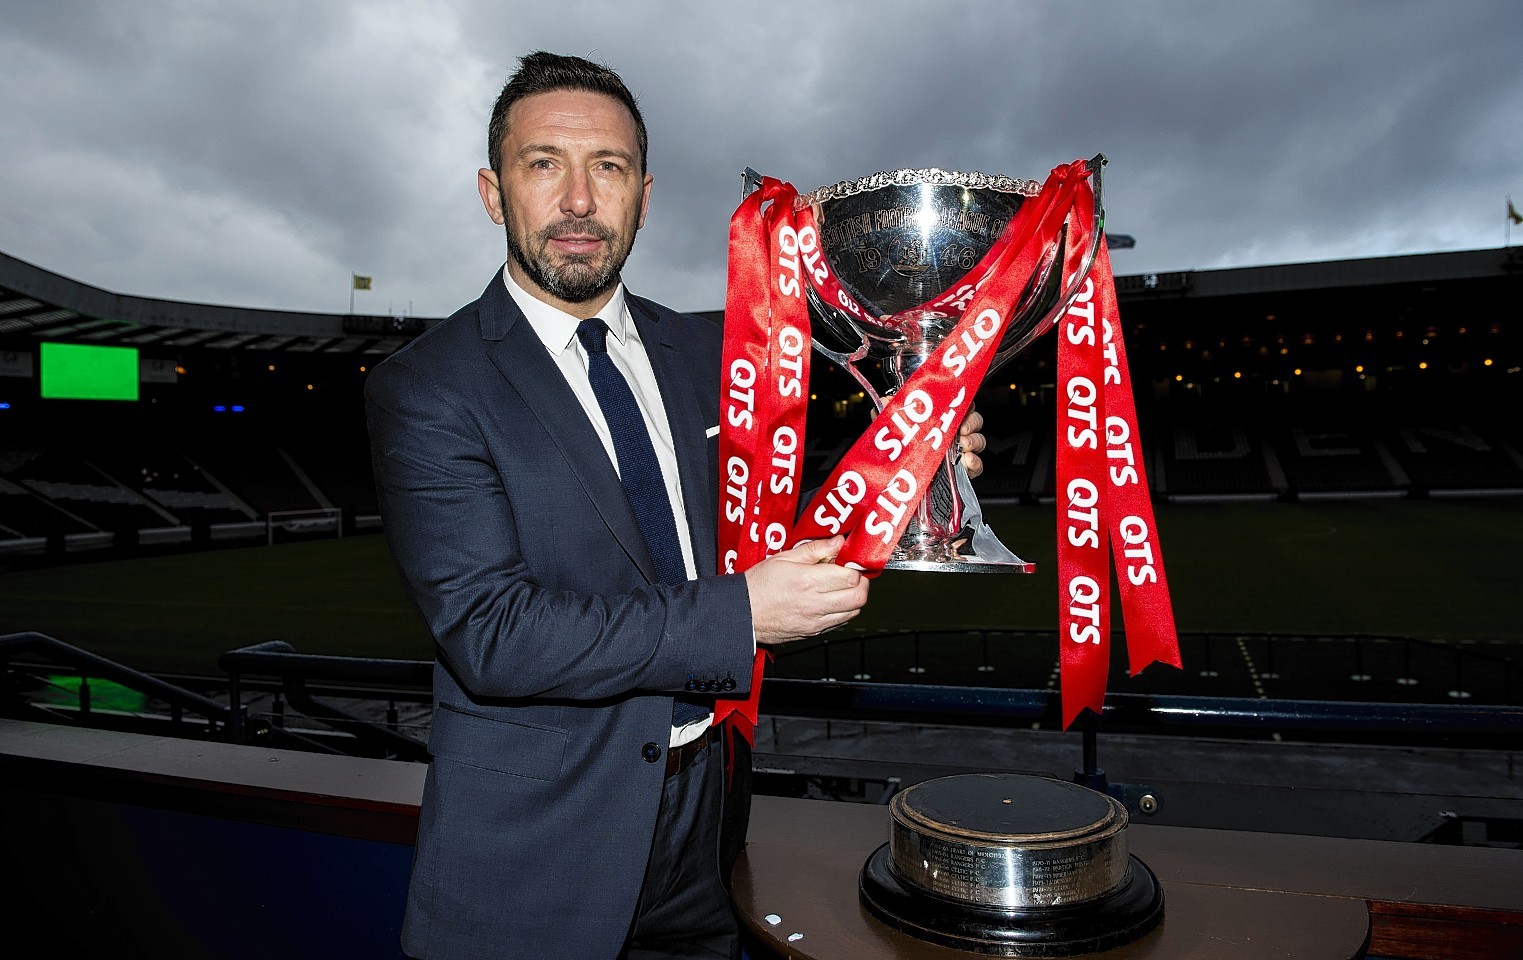 Derek McInnes doesn't want to relinquish the Dons grip on the trophy